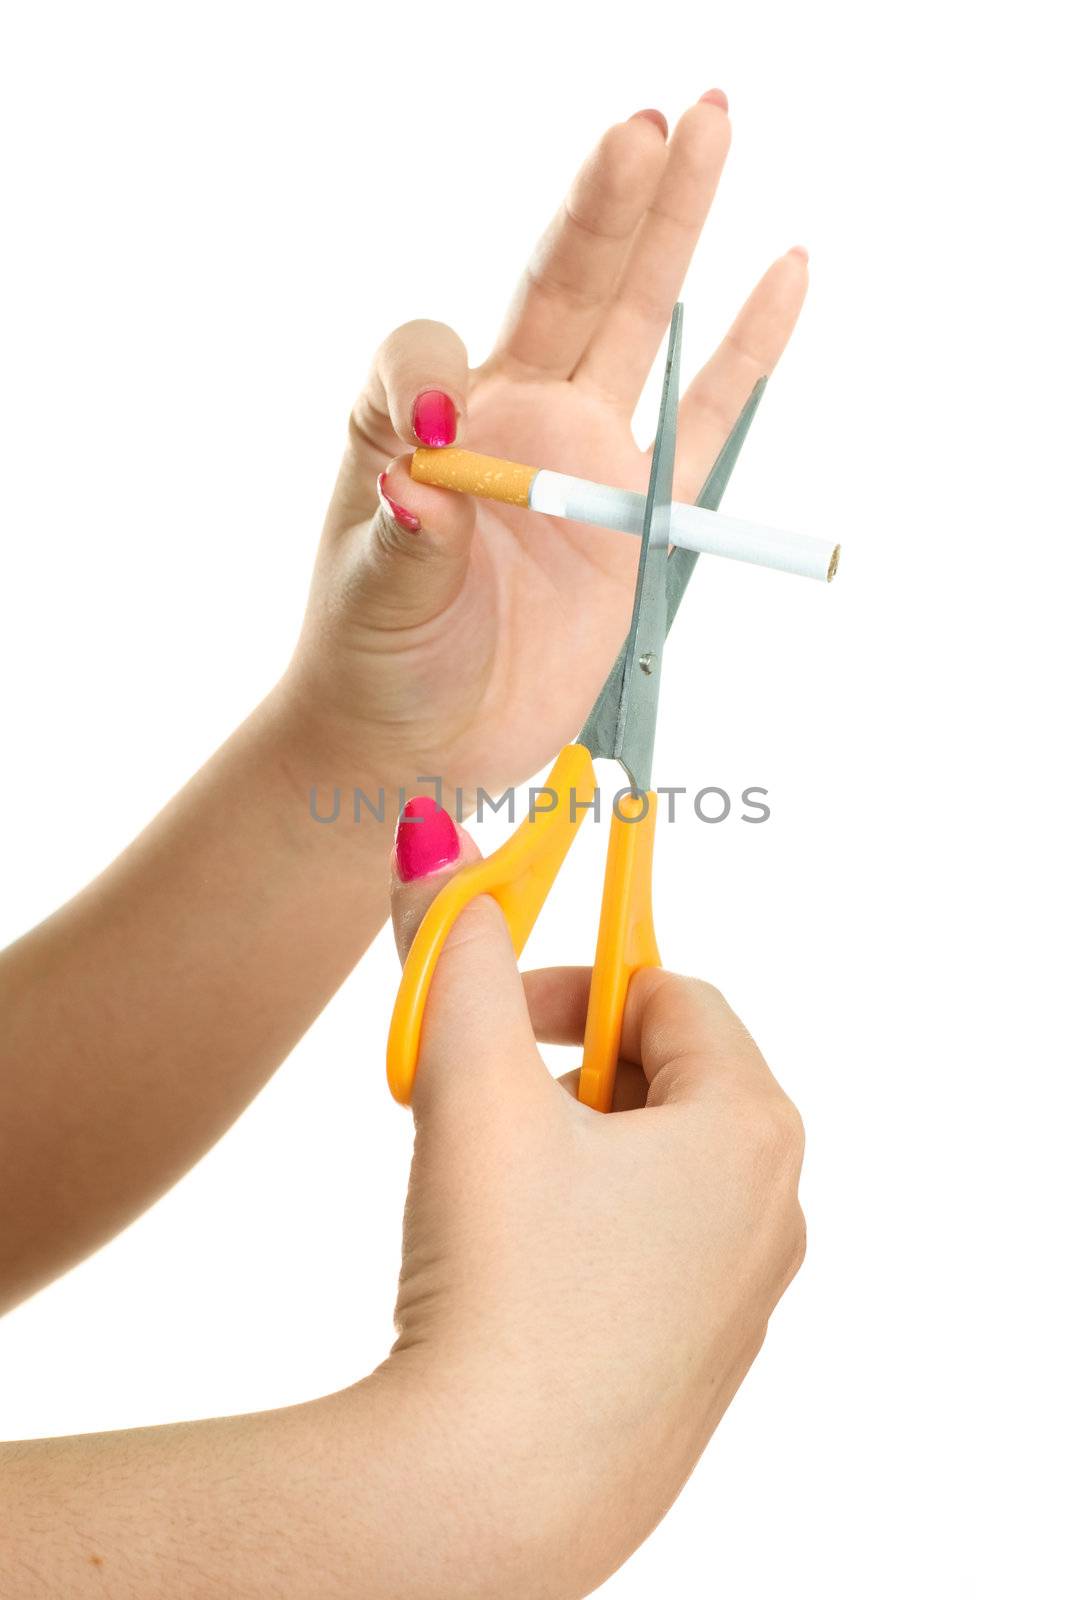 hands of a woman cutting a cigarette with scissors, isolated against white background